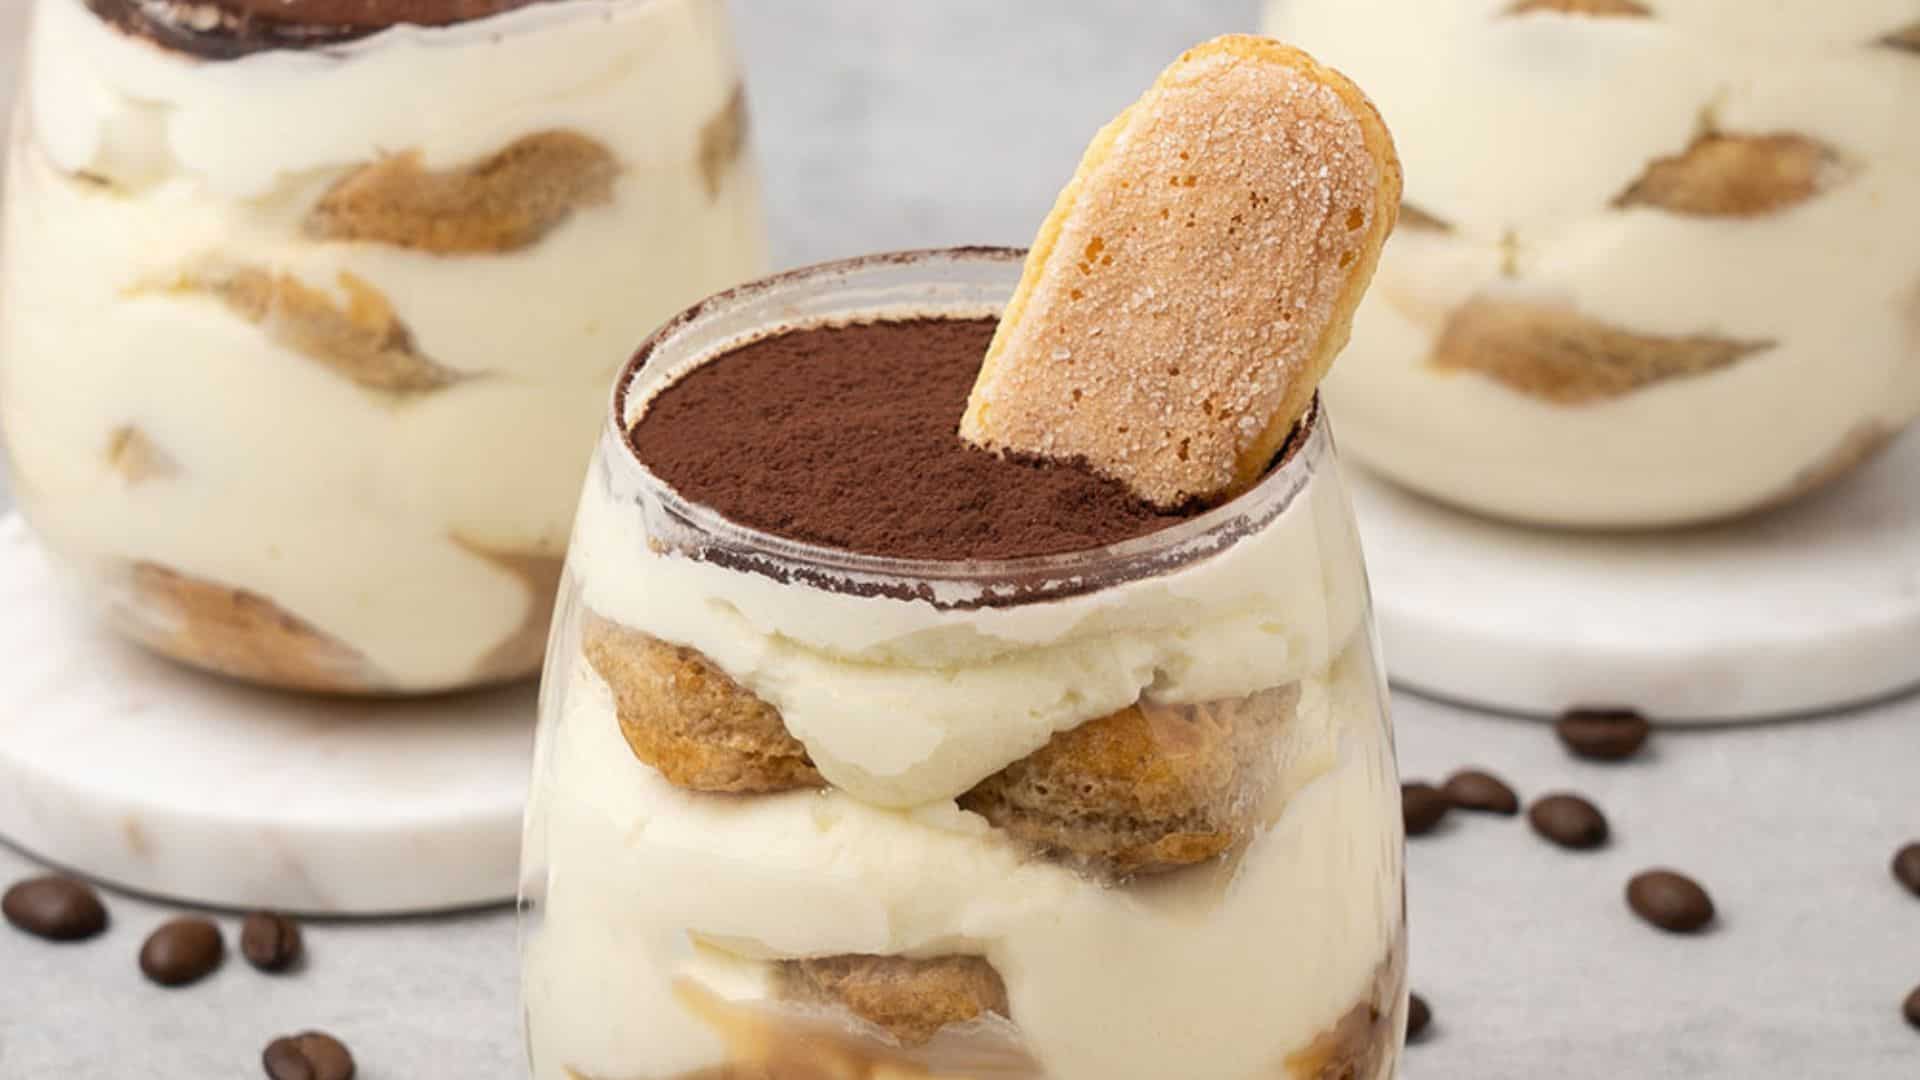 Bookmark These 25 Dessert Recipes for Your Next BBQ